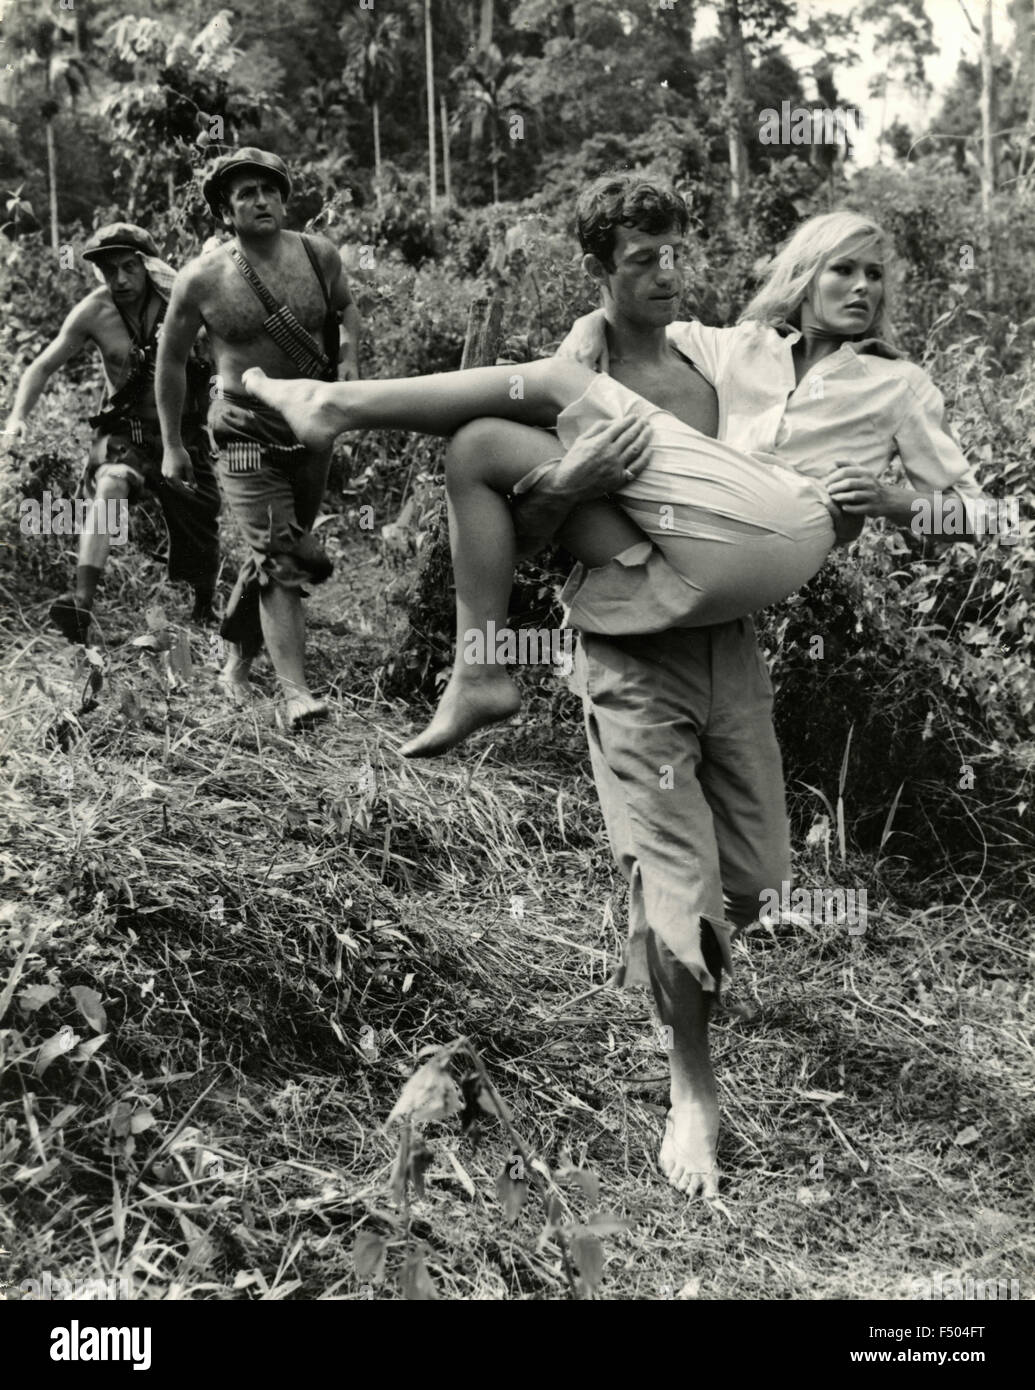 The actors Jean-Paul Belmondo and Ursula Andress in a scene from the film 'The Man from Hong Kong' (Les tribulations d'un chinois en Chine), France Stock Photo